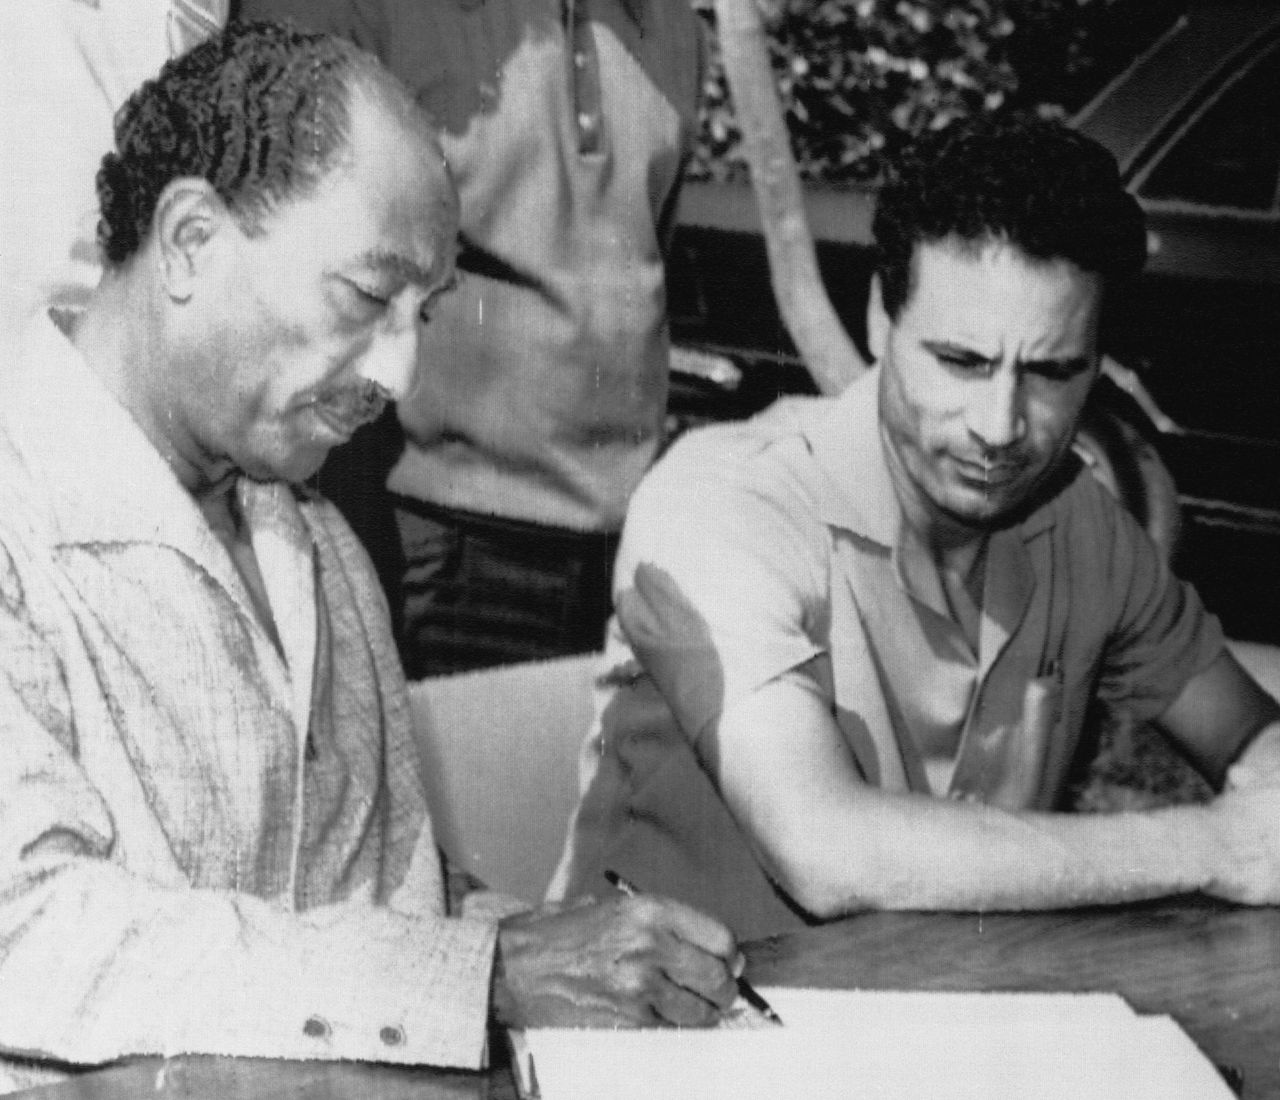 Sadat, left, and Gaddafi look over a communiqué after agreeing to merge their two countries on Sept. 7, 1973.